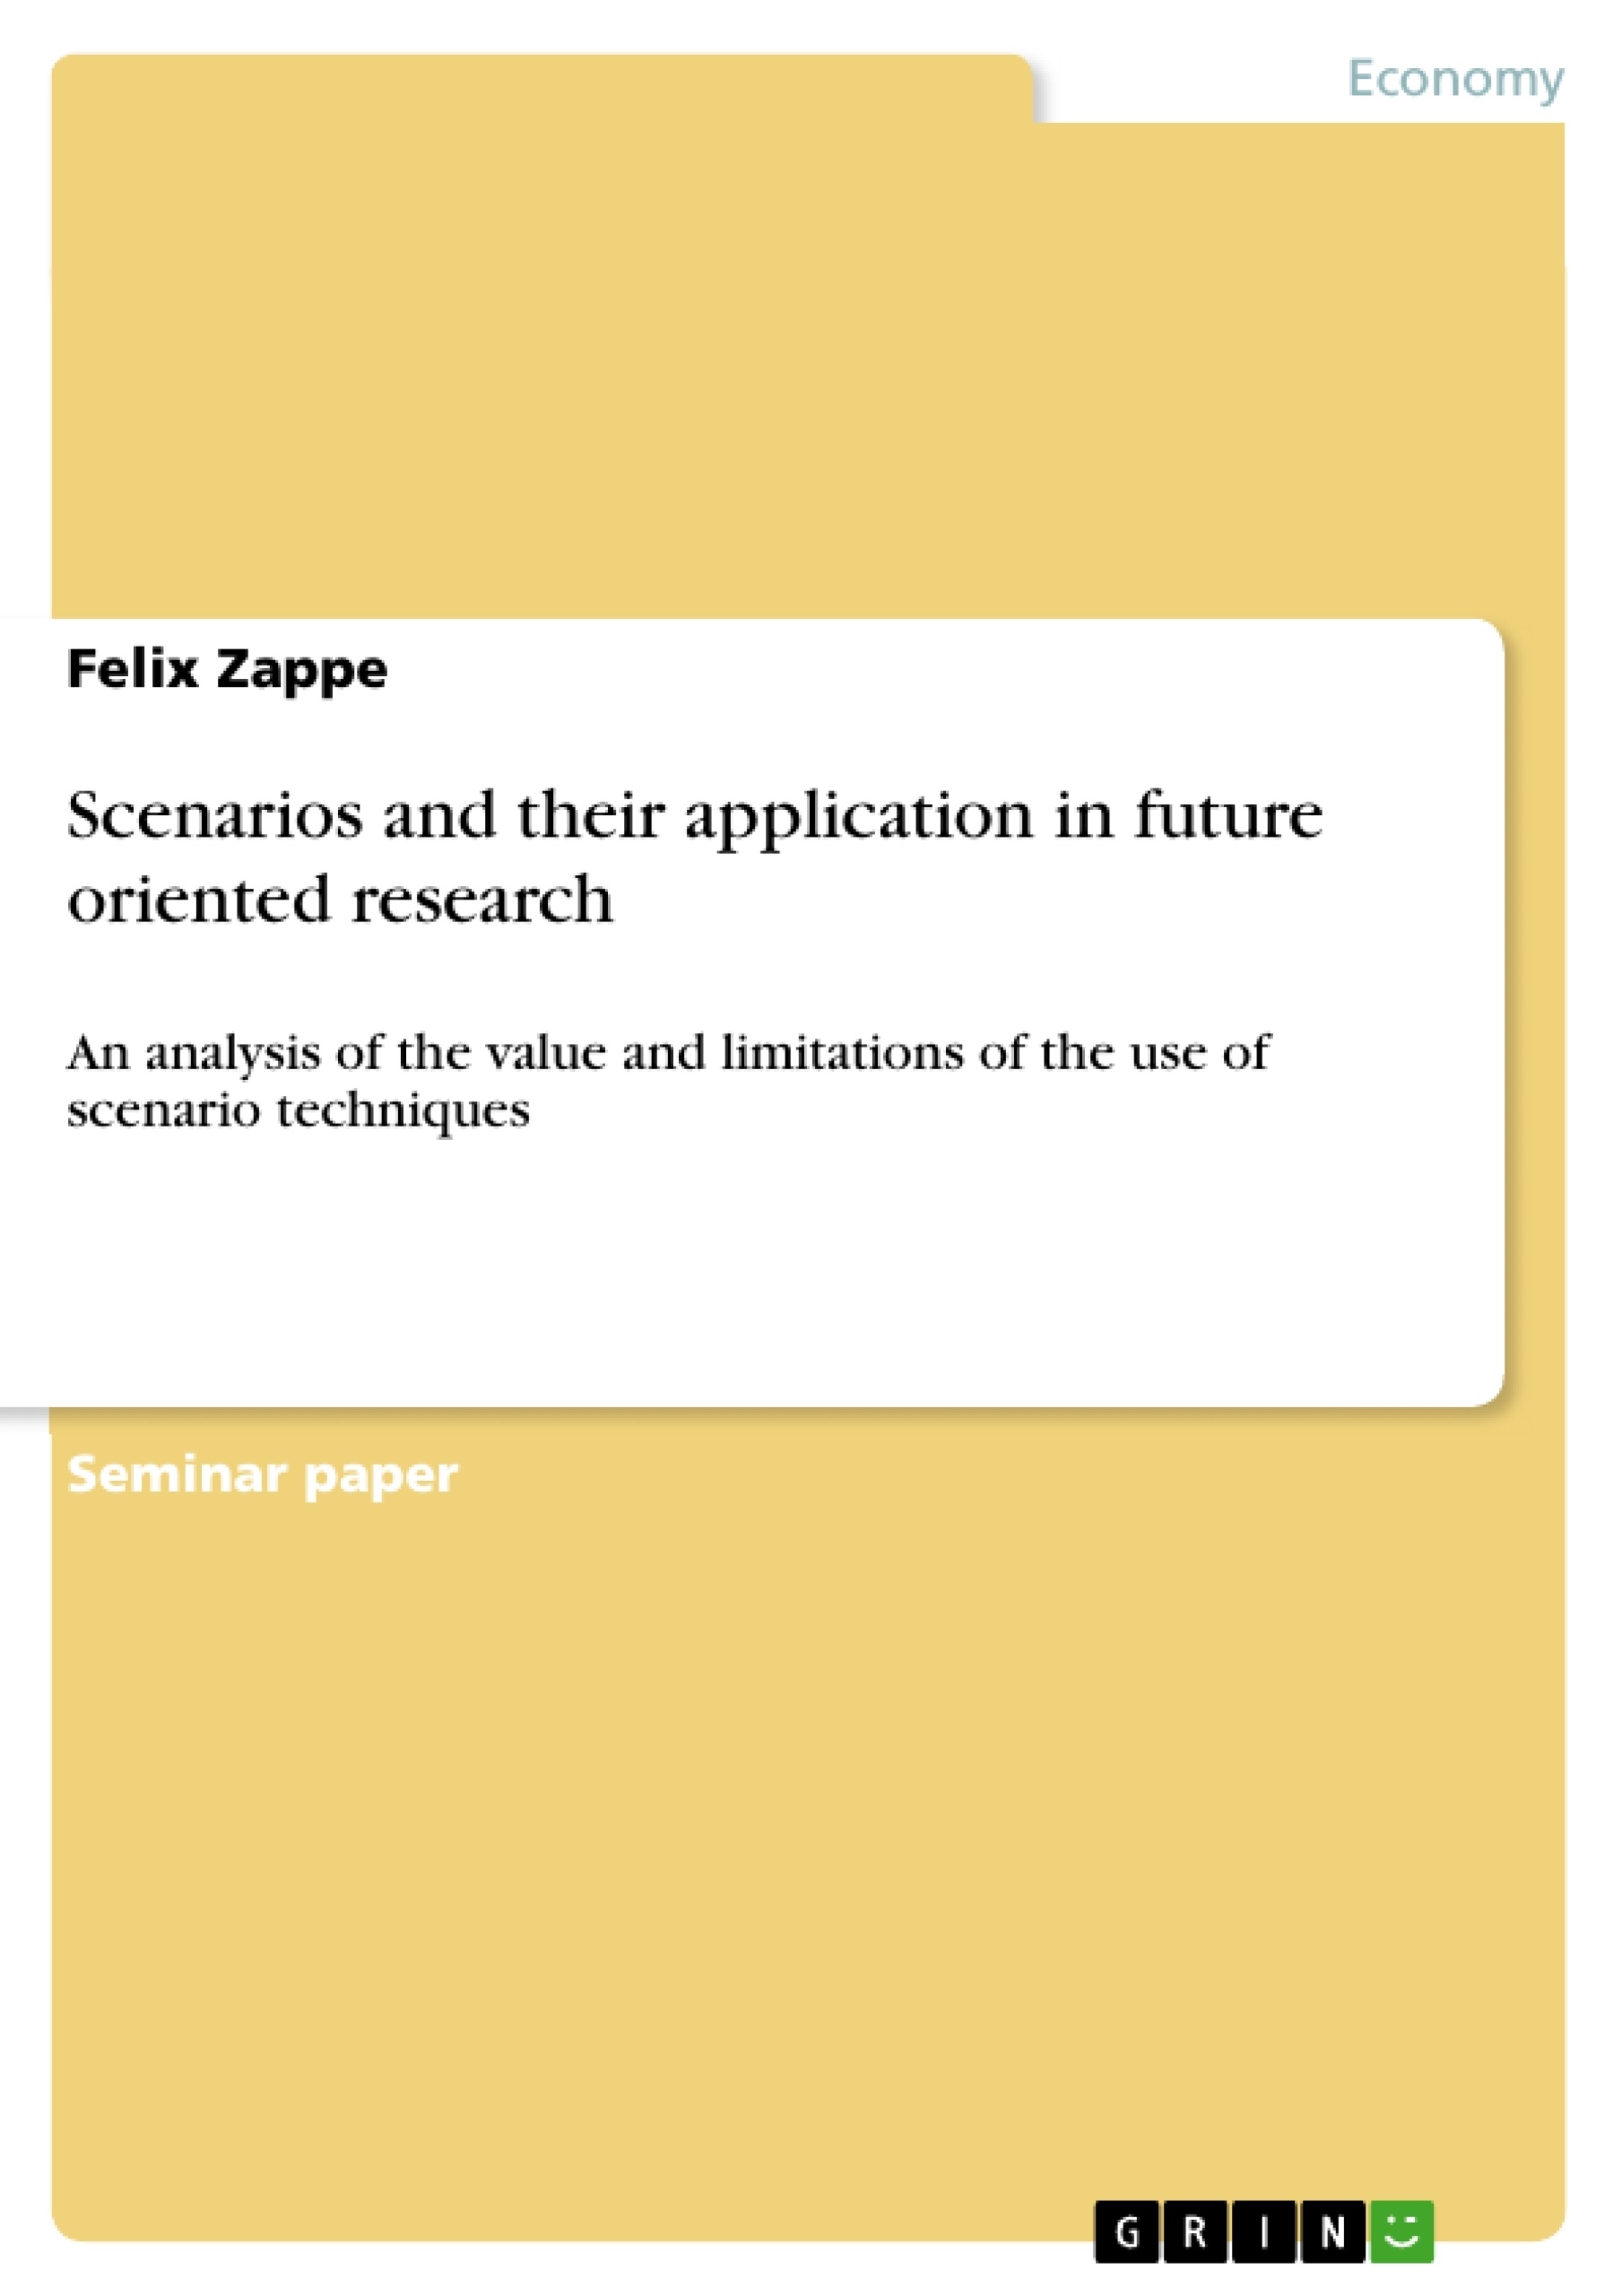 Título: Scenarios and their application in future oriented research